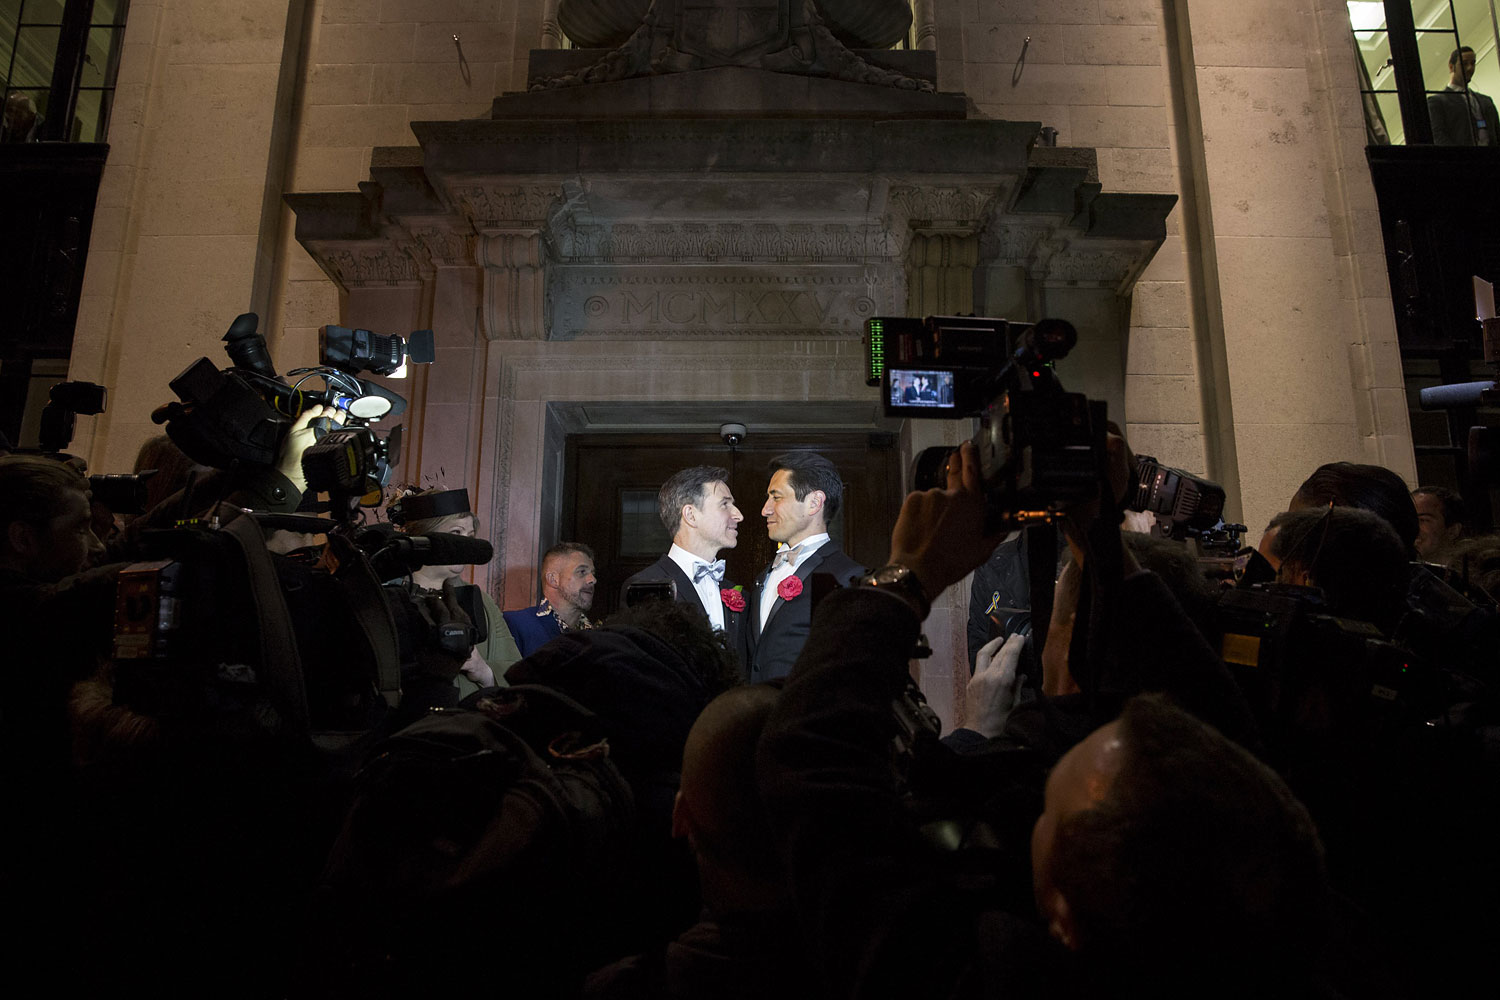 Gay couple Peter McGraith and David Cabreza stand on the steps of Islington Town Hall after being married shortly after midnight in one of the UK's first same-sex weddings on March 29, 2014 in London. (Rob Stothard—Getty Images)